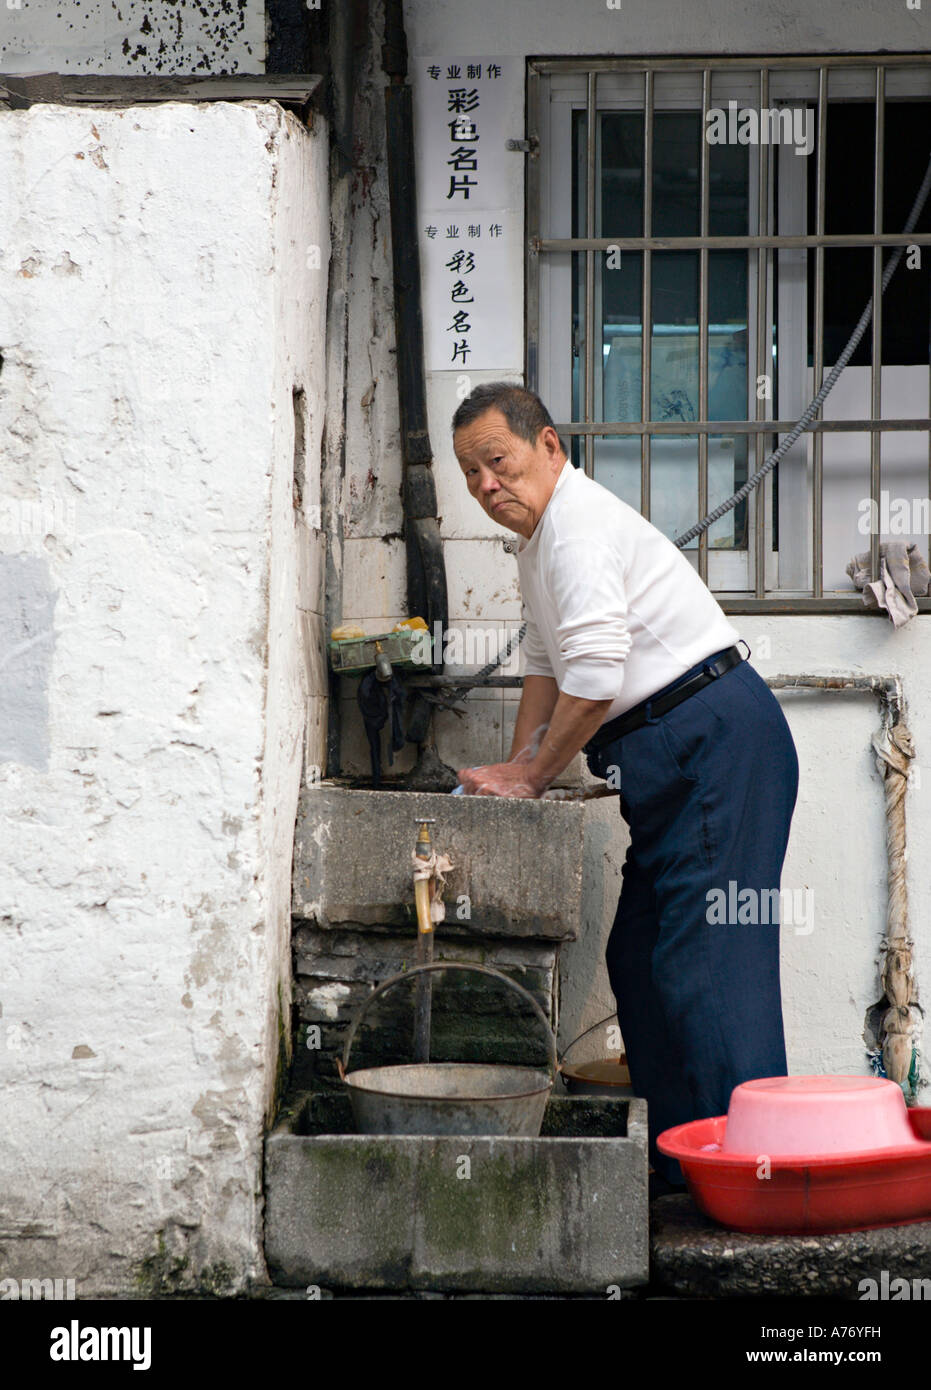 China Shanghai Elderly Chinese Man Washing Clothes In A